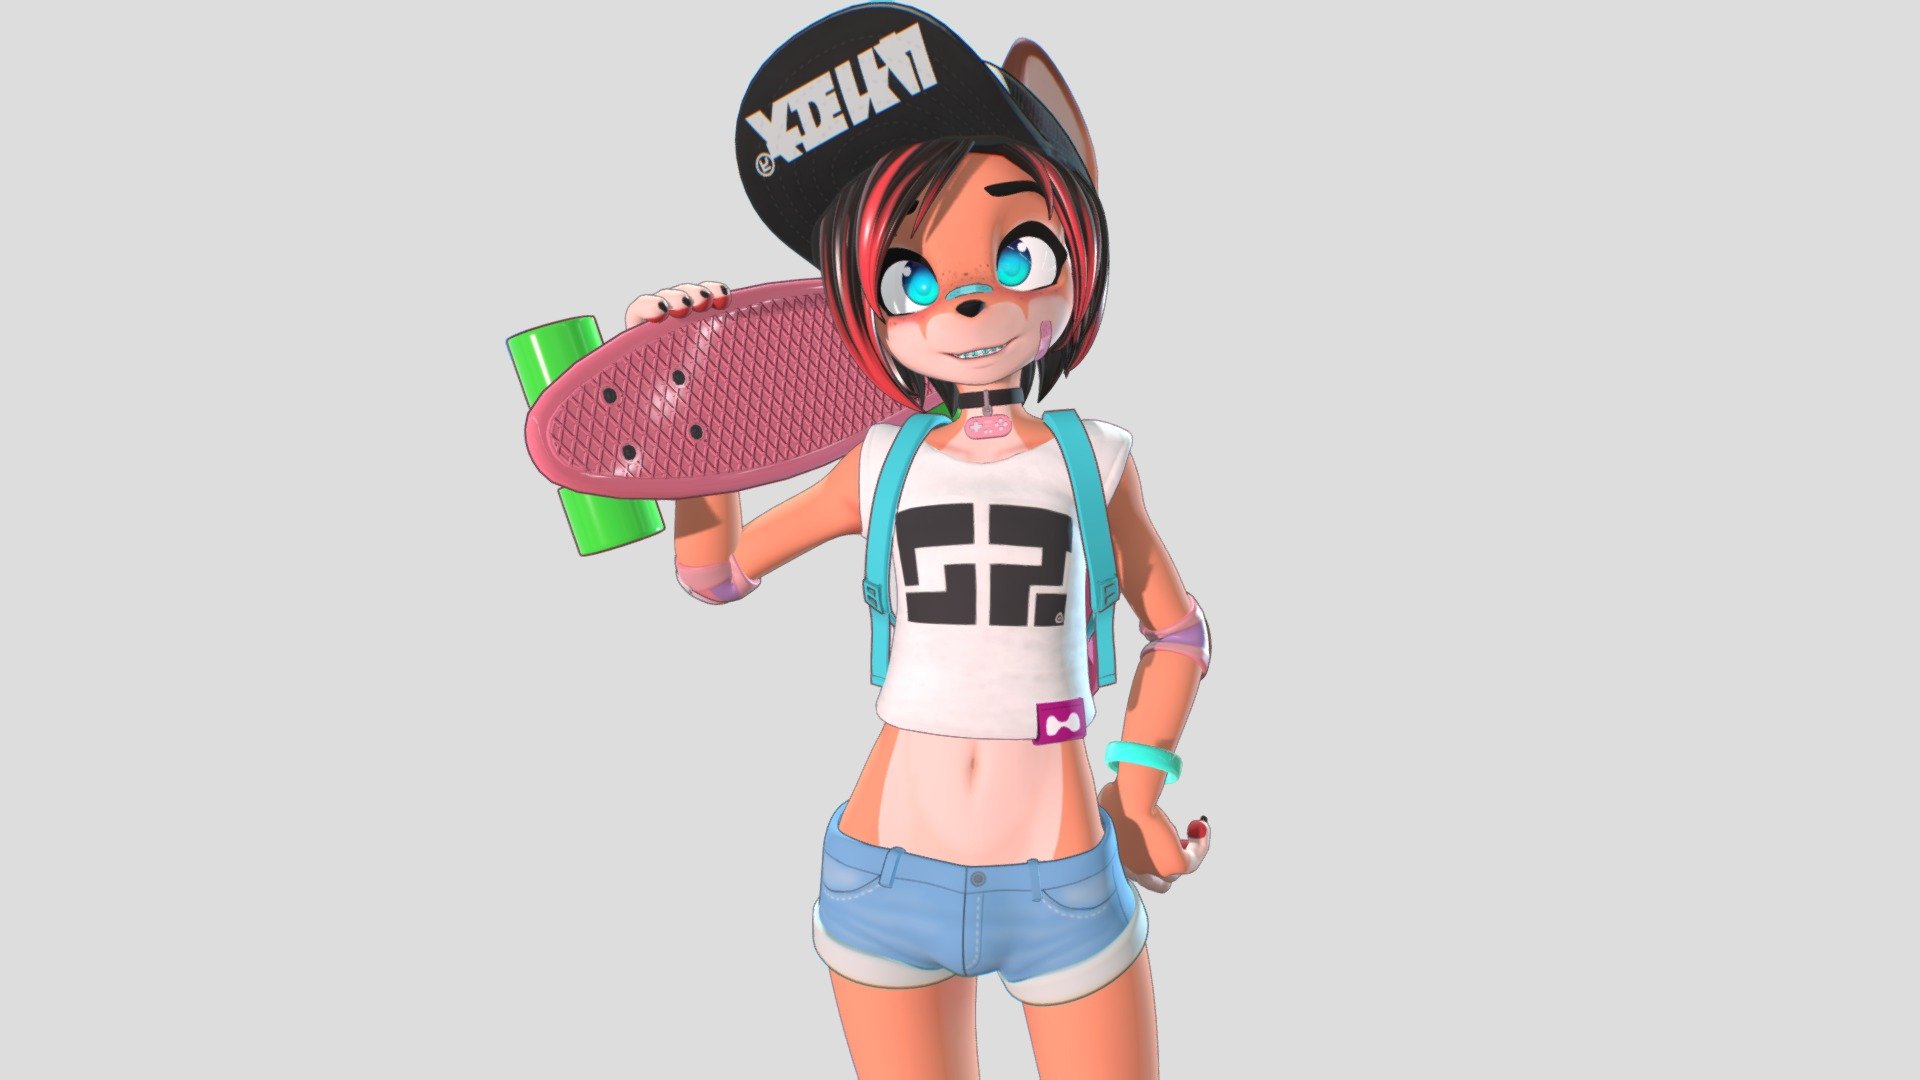 So I finally Got around to posting my main character Kayla! I am actually thinking of giving him an update as his model is quite out-dated now in comparison to my newer models 3d model